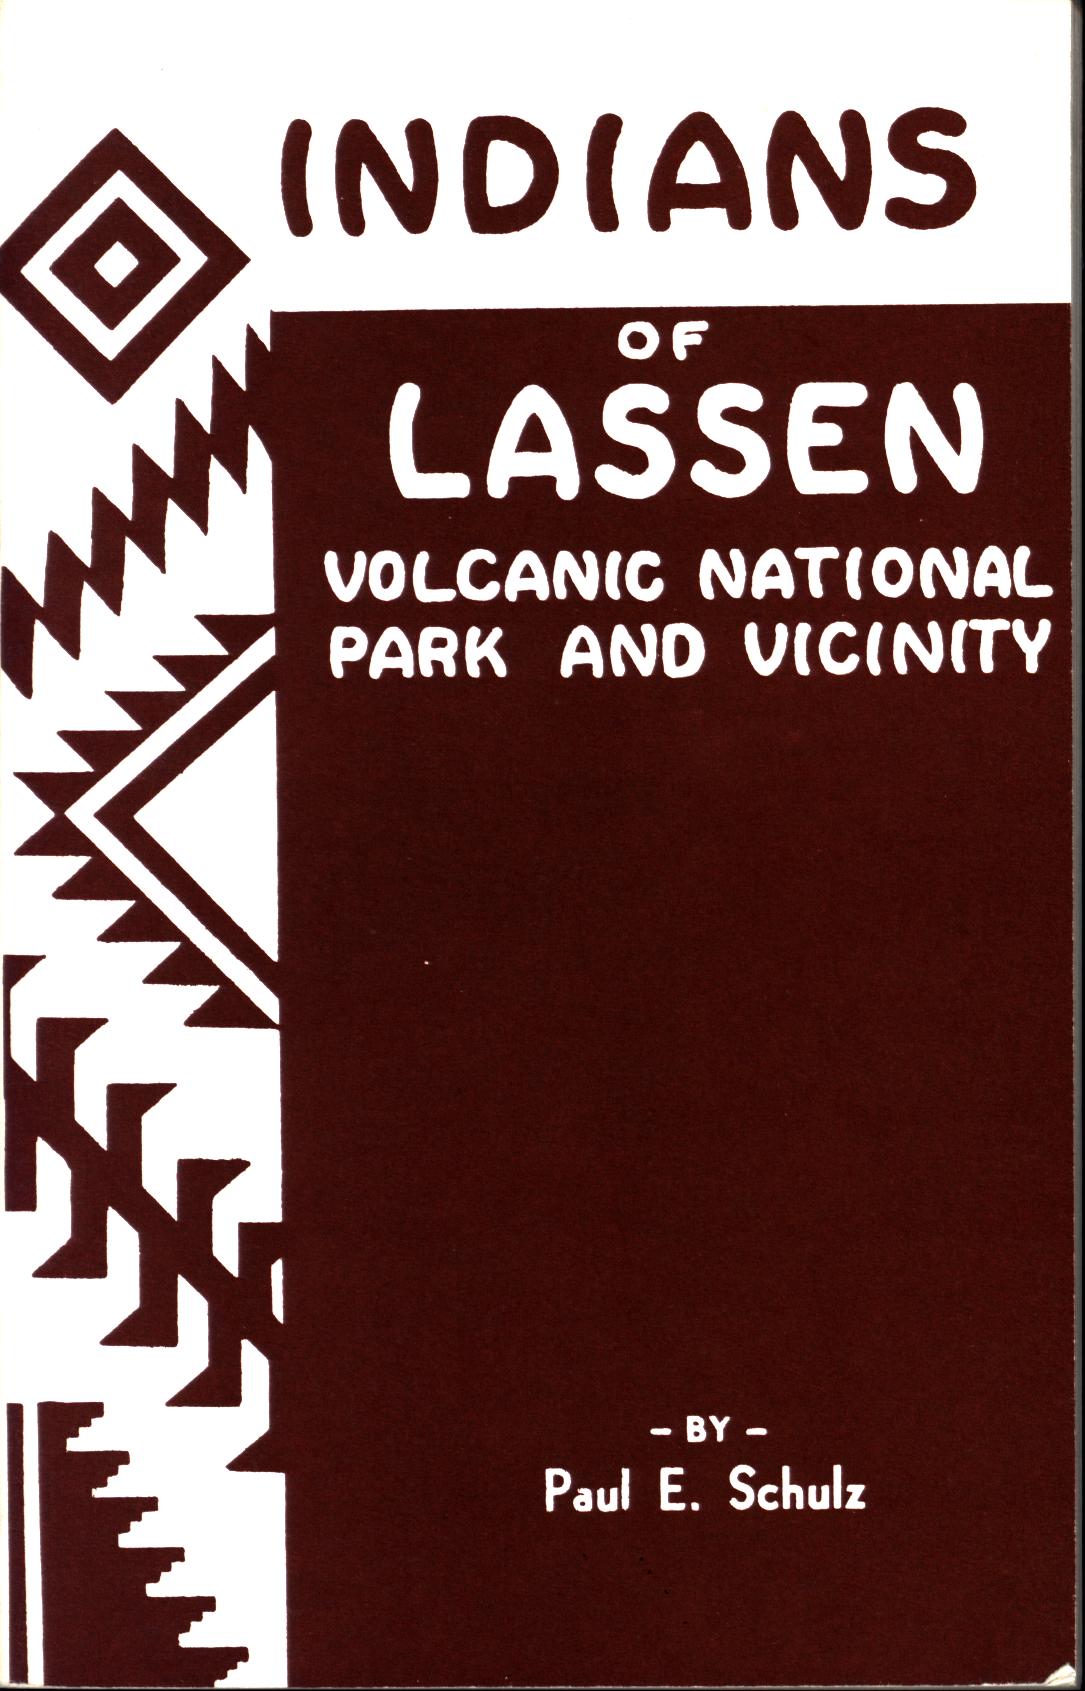 INDIANS OF LASSEN VOLCANIC NATIONAL PARK AND VICINITY. by Paul E. Schulz. 